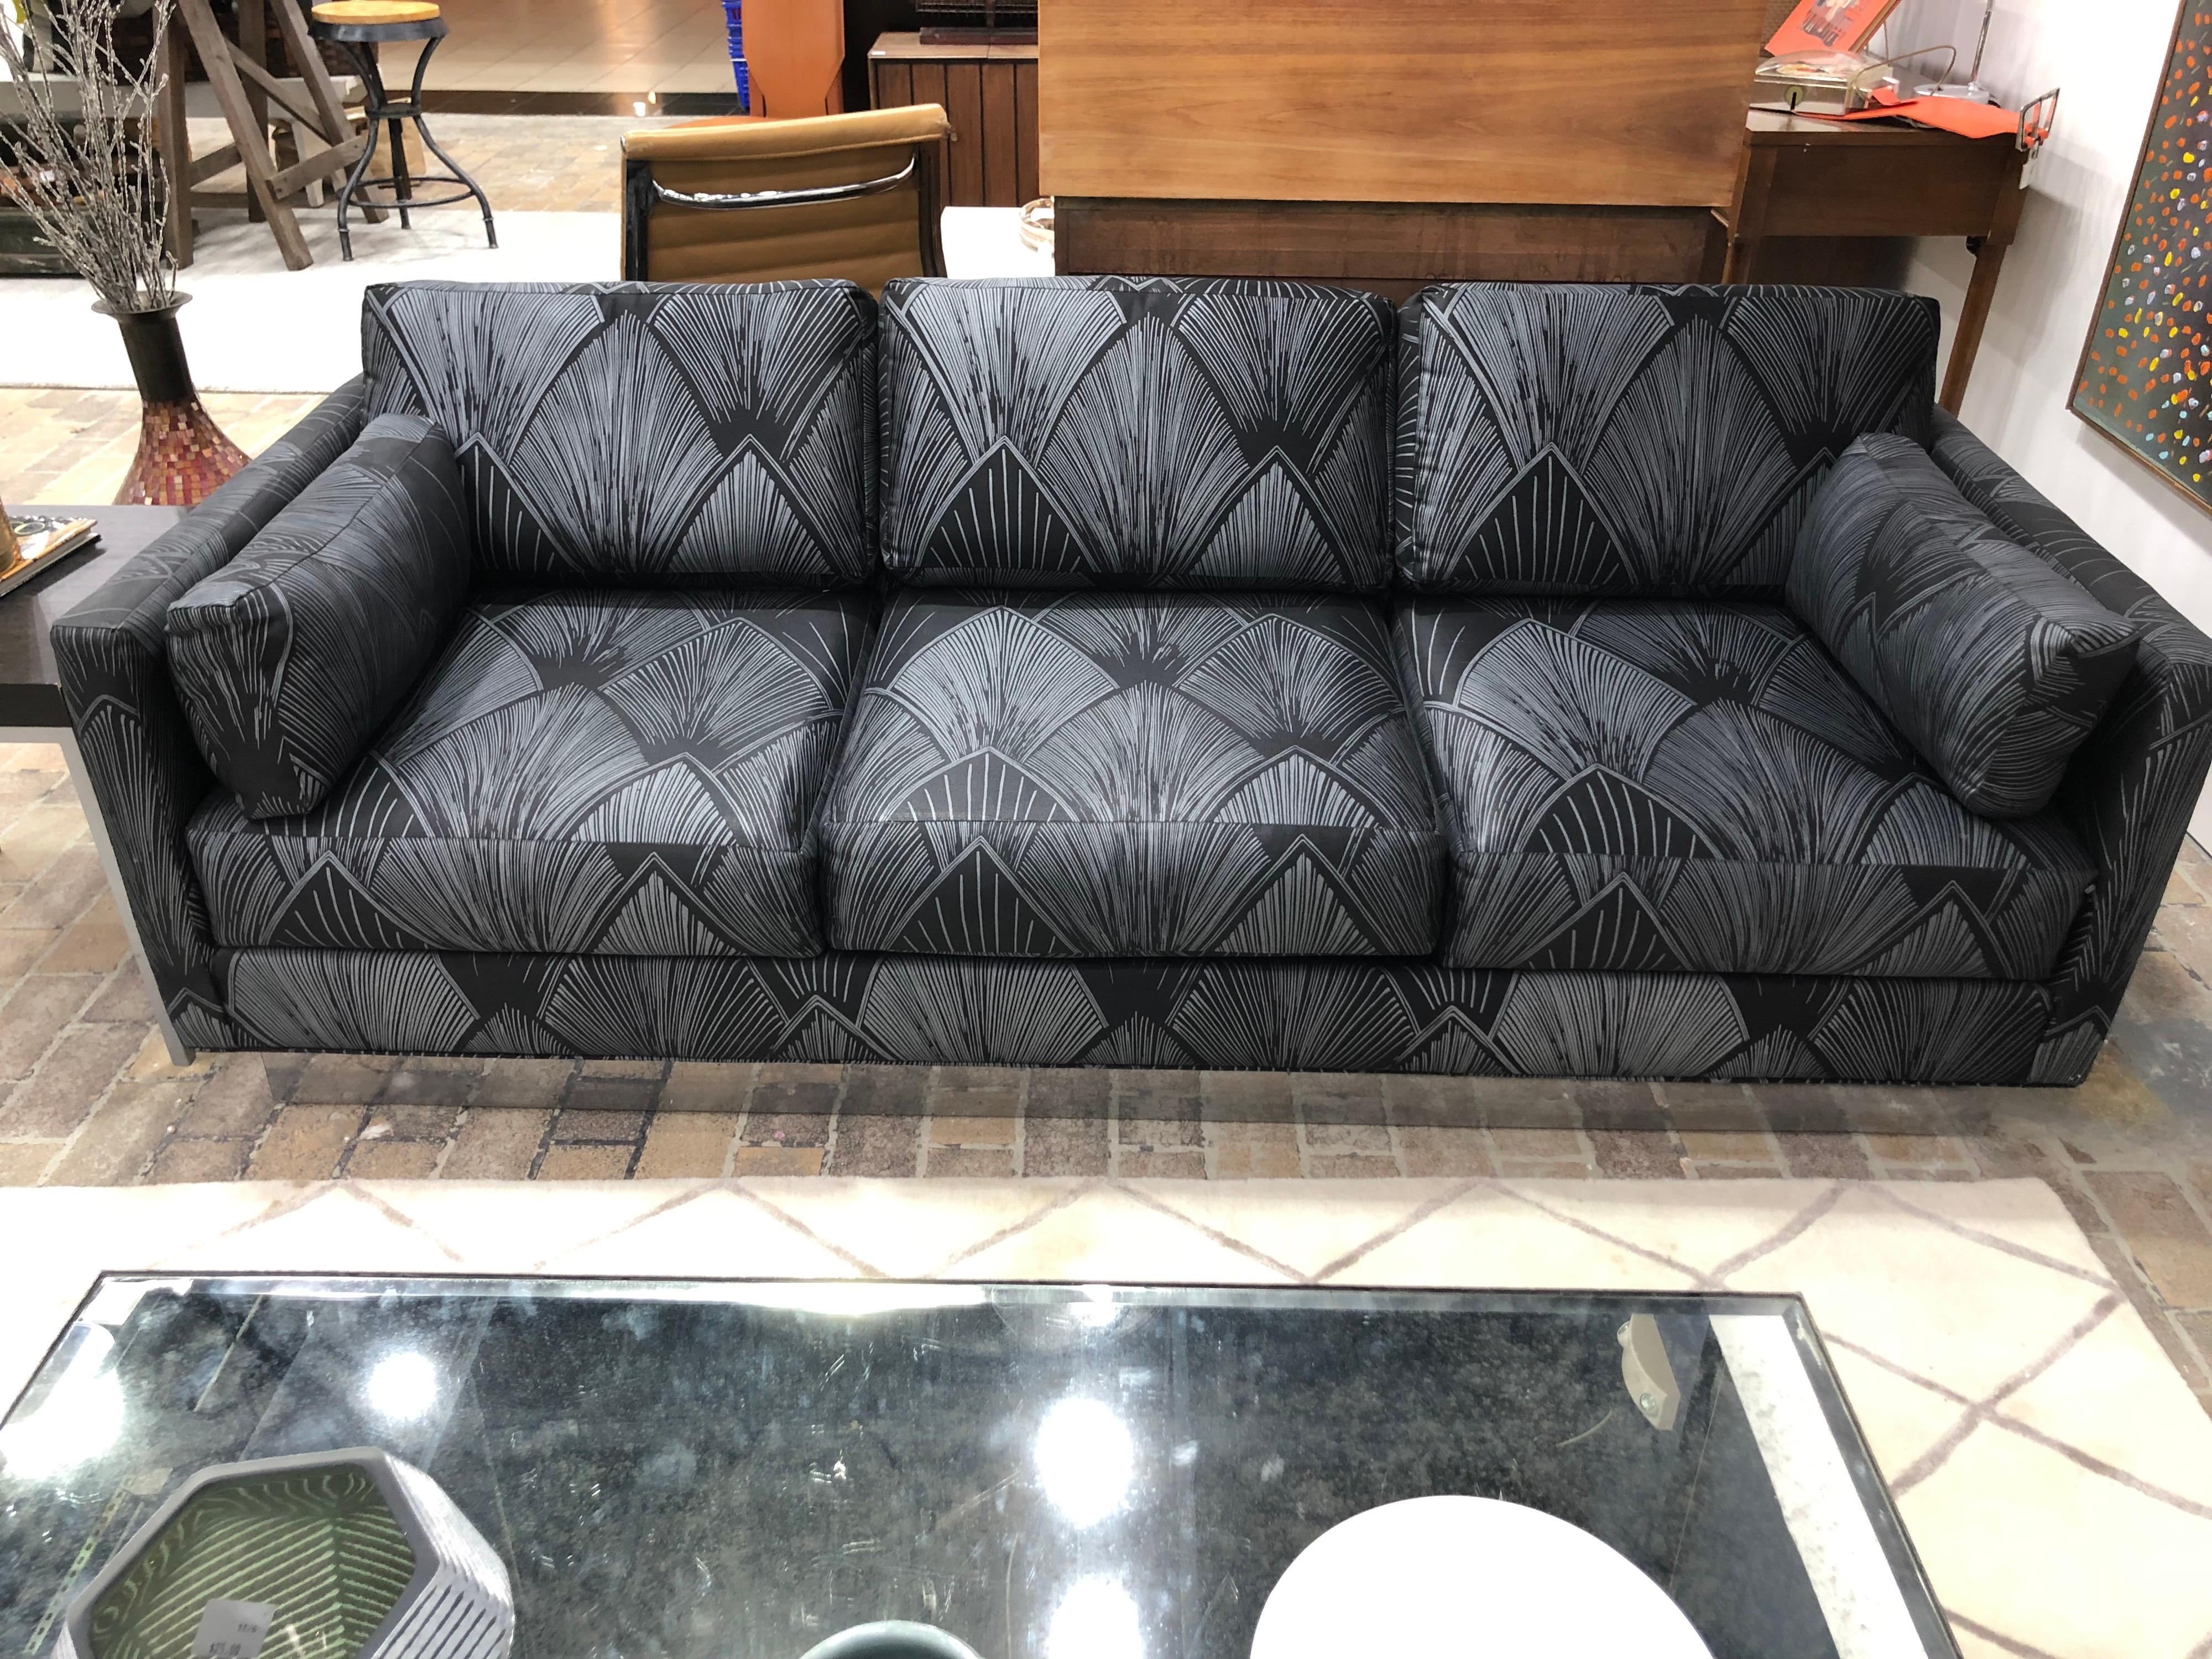 1980's Milo Baughman Style black sofa with chrome base. This stunning piece was barely used and is in impeccable condition. Perfect for that spacious high end nyc apartment. Firm pillows and cushions make up this well made tuxedo style sofa. Its